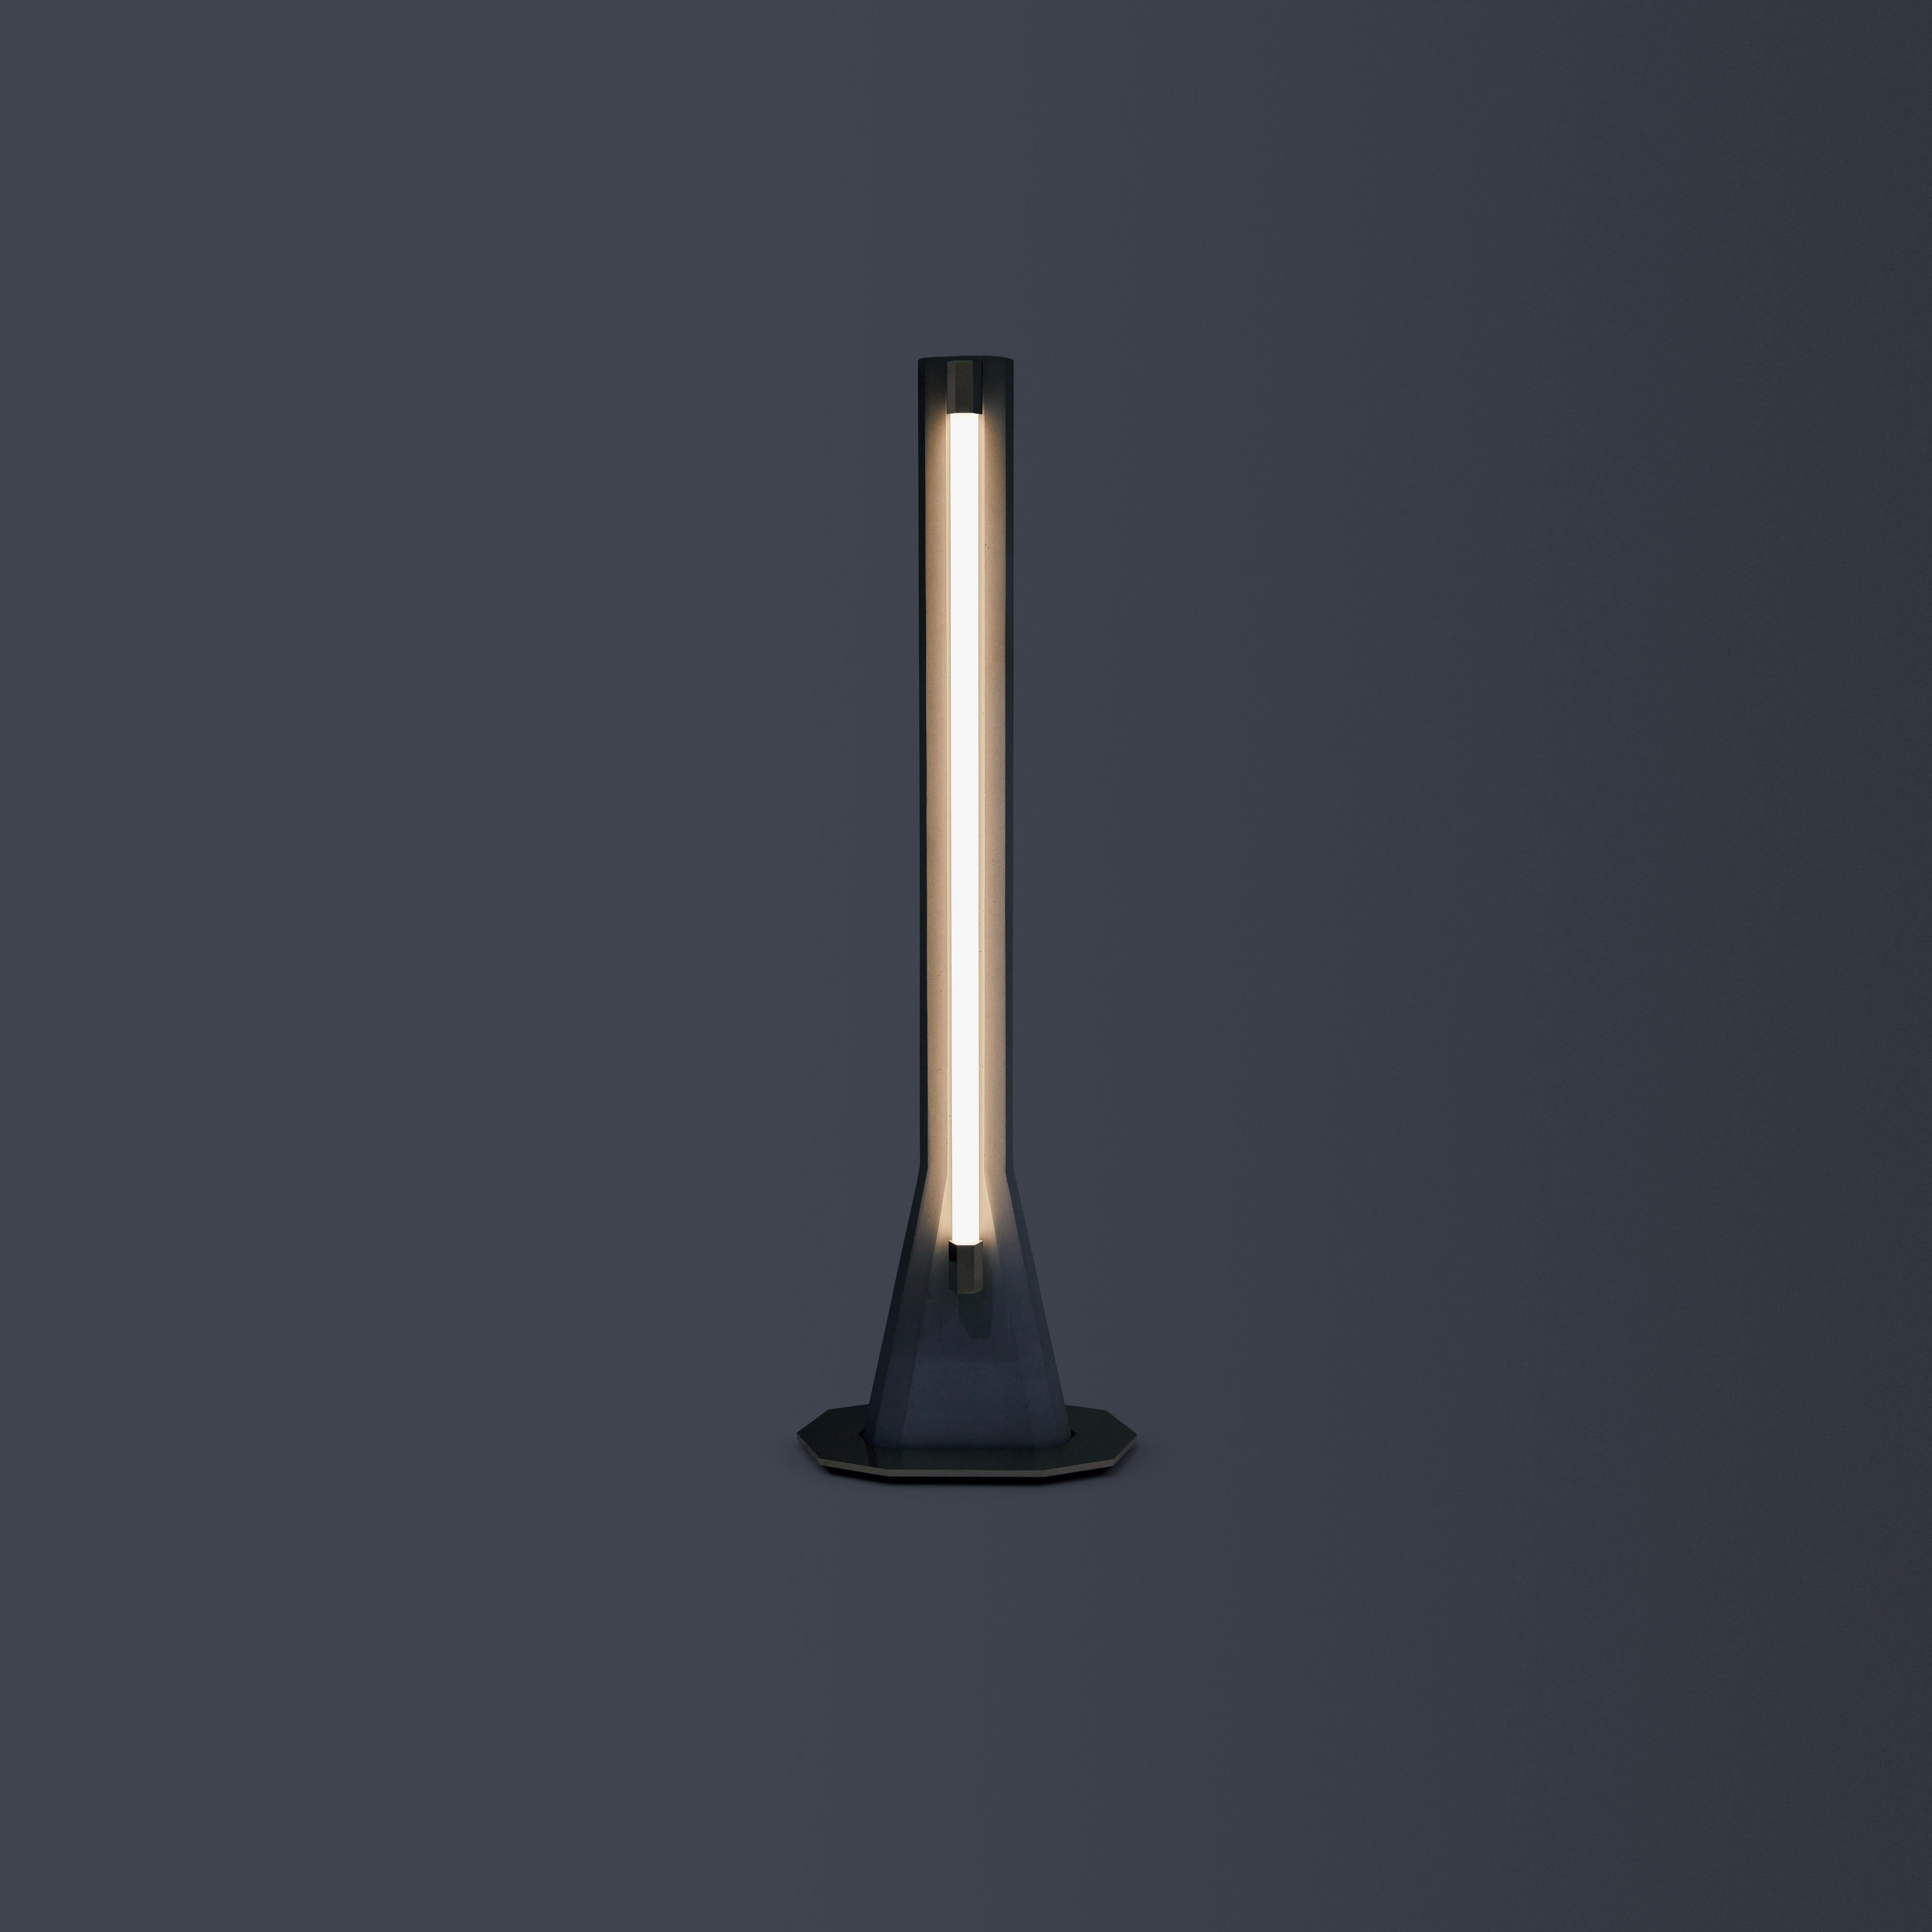 The Ginza floor lamp by Victoria Wilmotte is a sculpture from any angle whether on or off . Made from cast concrete in Alfa French Grey finish it is balanced with a polished gold finish base and detailing that provides the perfect foil. The LED tube